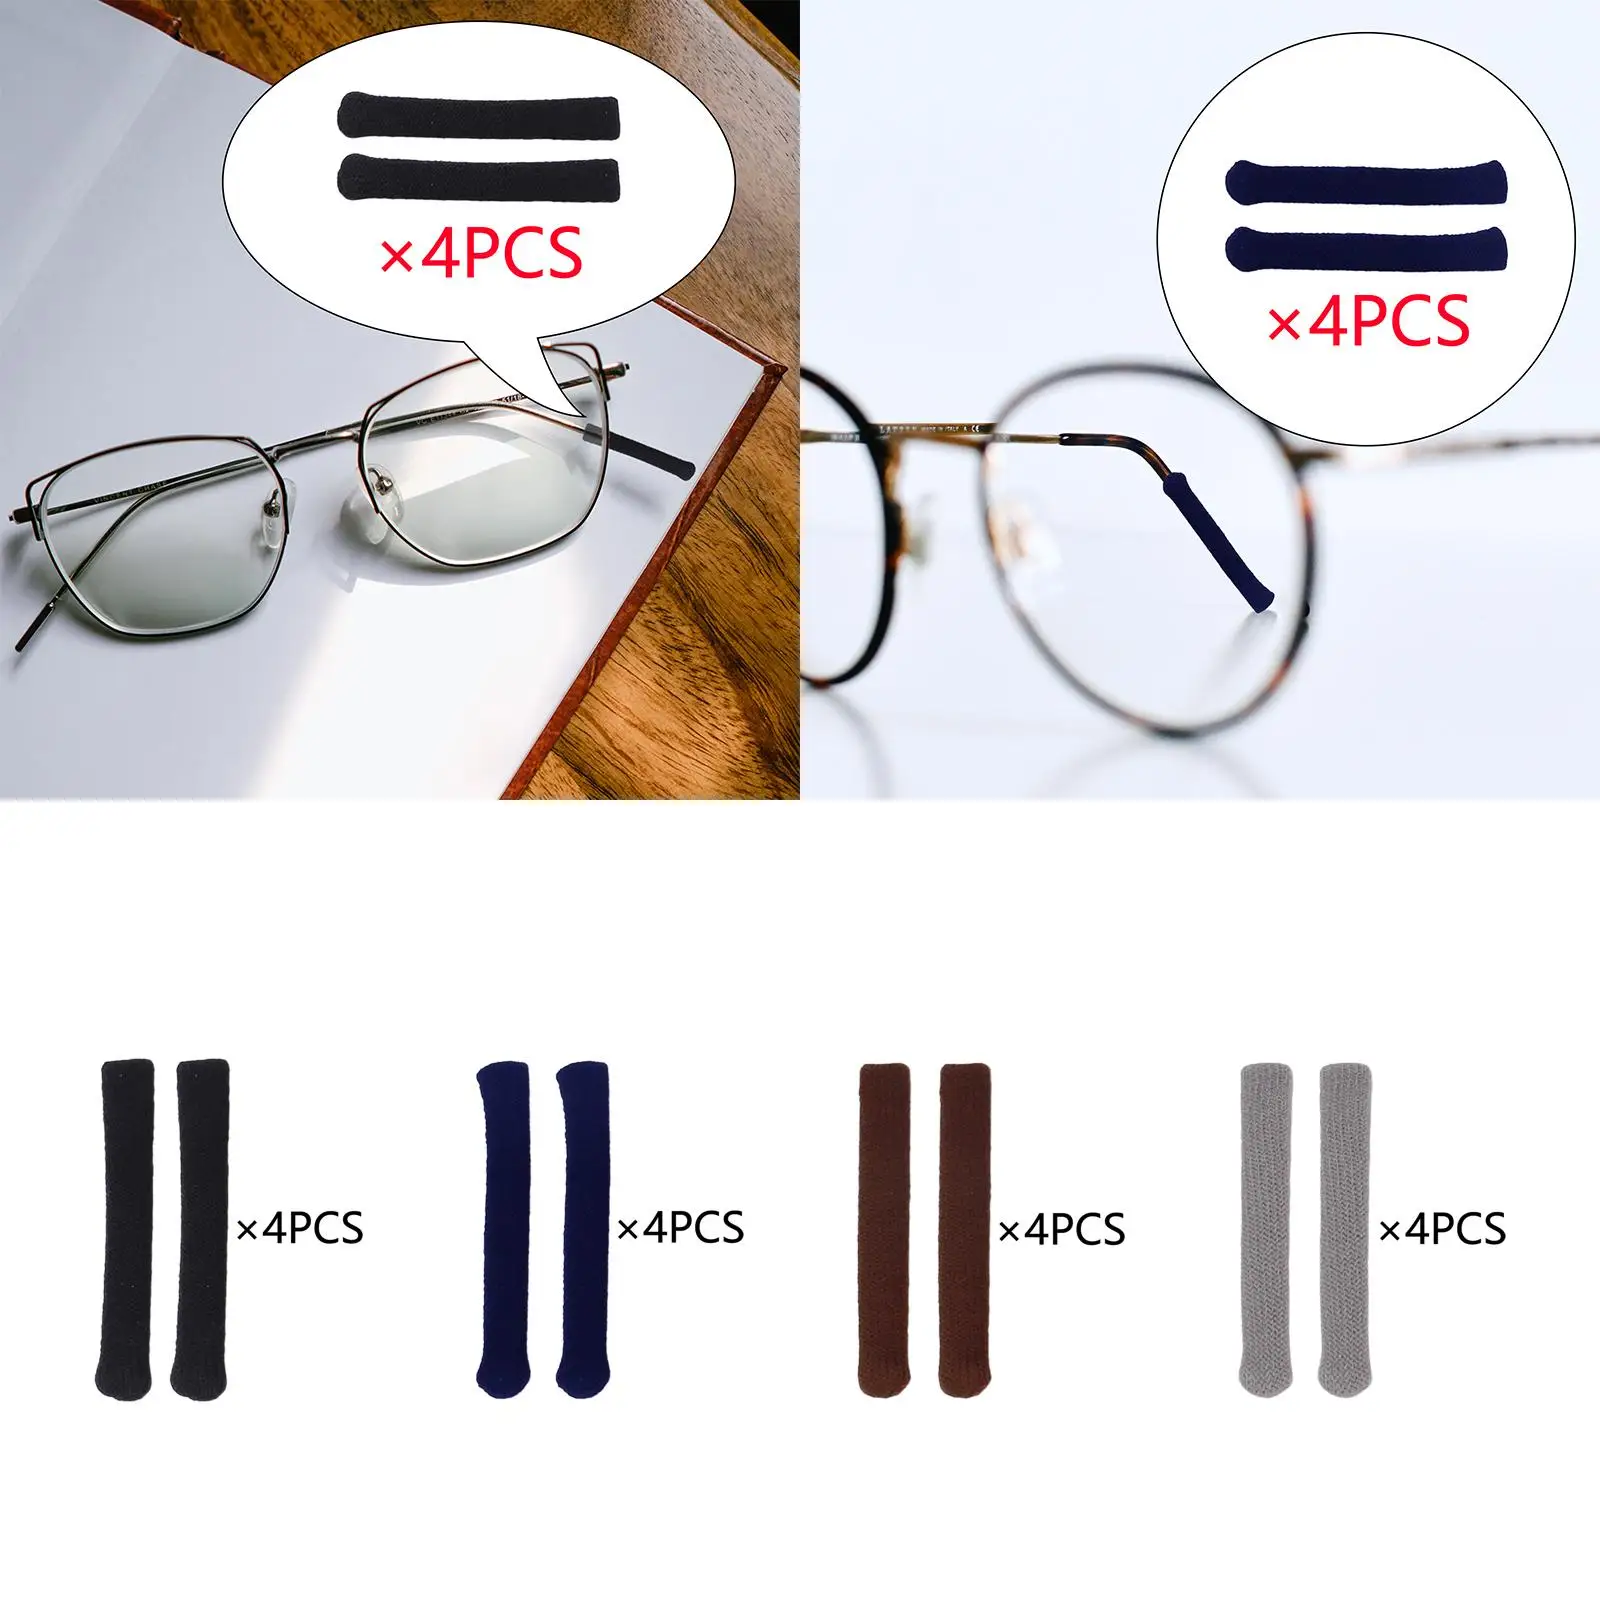 4 Pairs Eyeglasses Temple Tips Sleeve Retainer Temple Pads Anti Slip Glasses Ear Cushions for Sunglasses Eyeglasses Eyewear